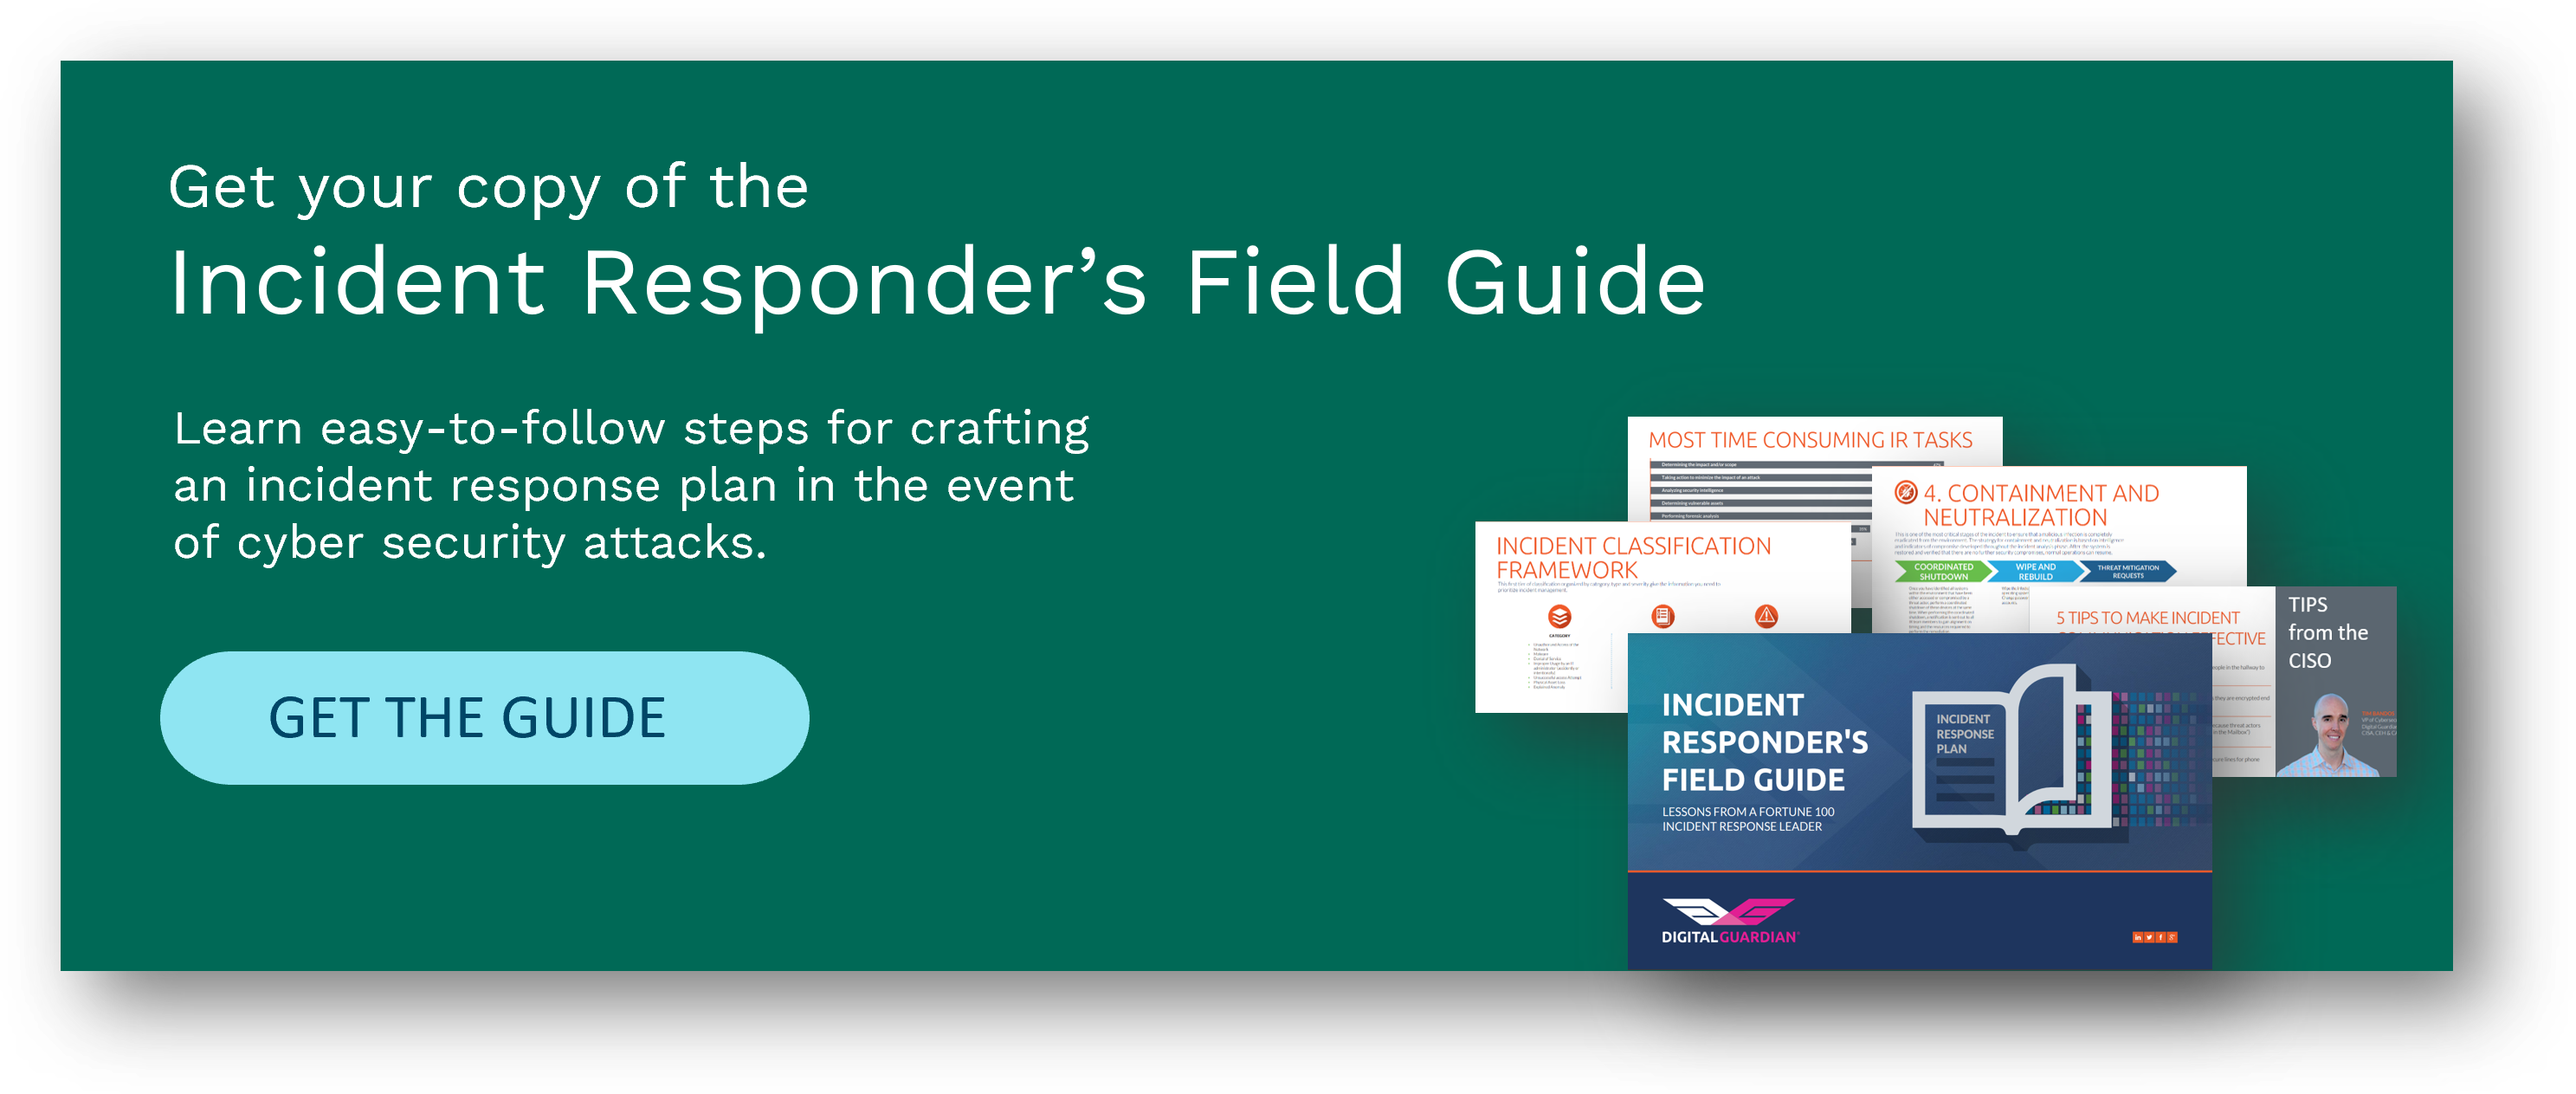 Download the Incident Responder's Field Guide